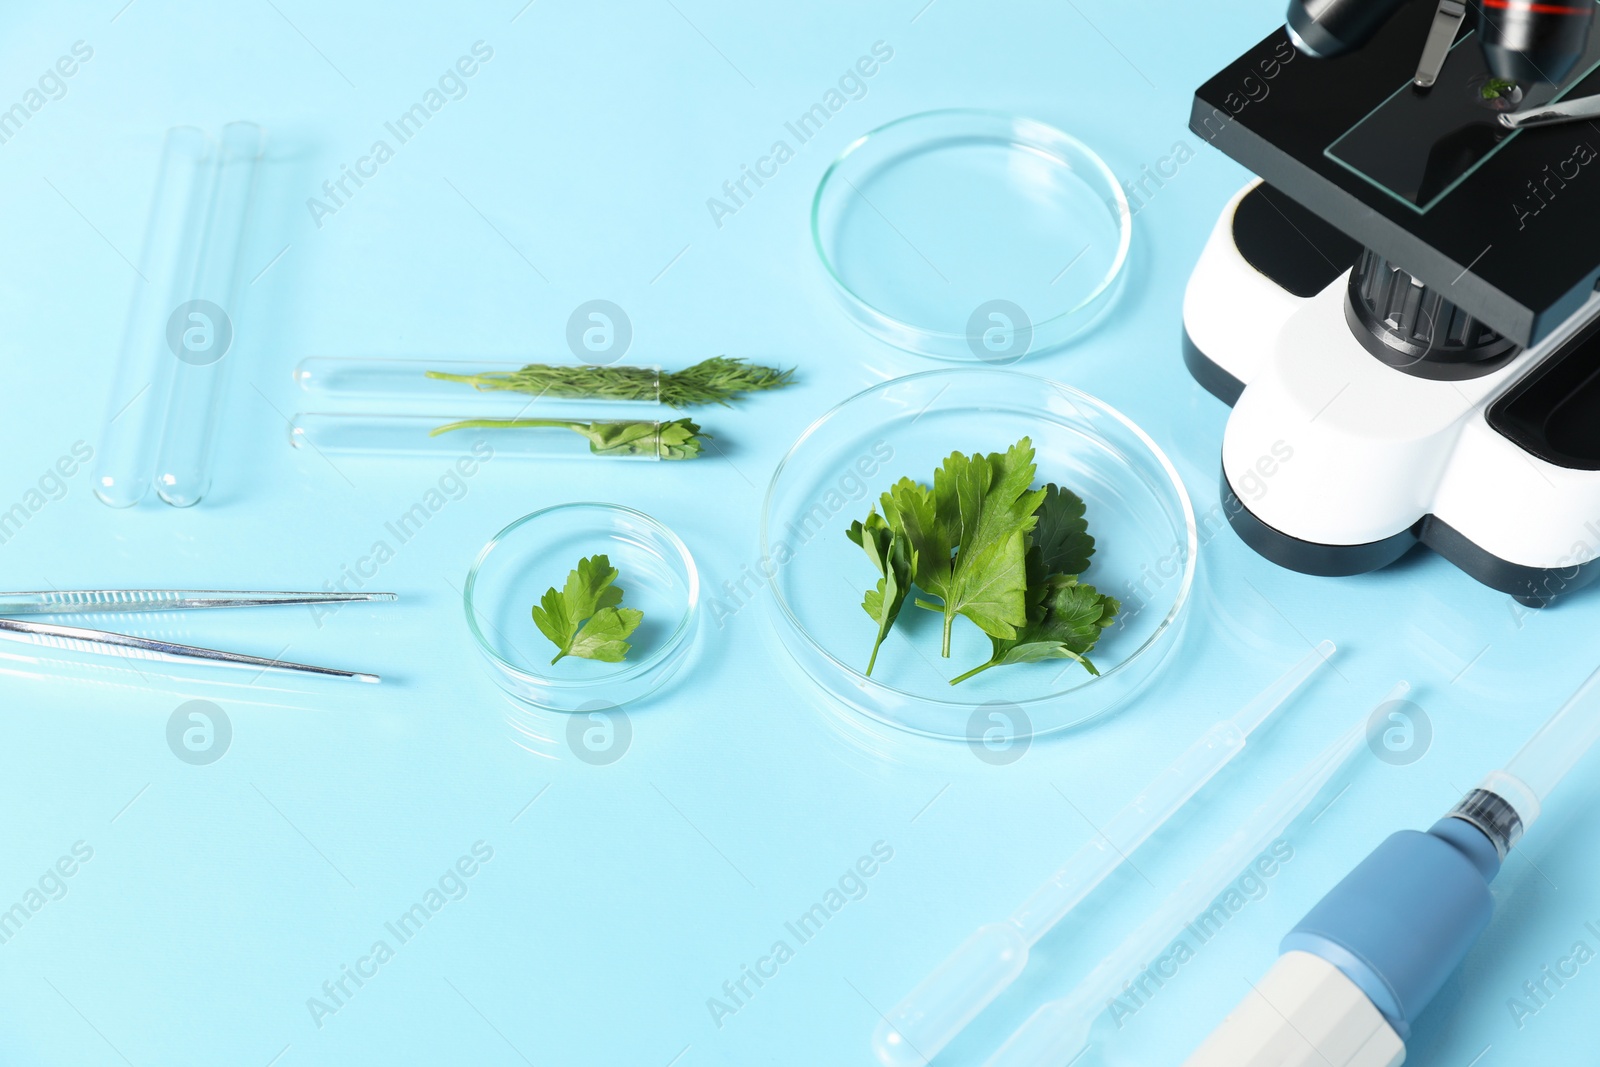 Photo of Food Quality Control. Microscope, petri dishes with parsley and other laboratory equipment on light blue background